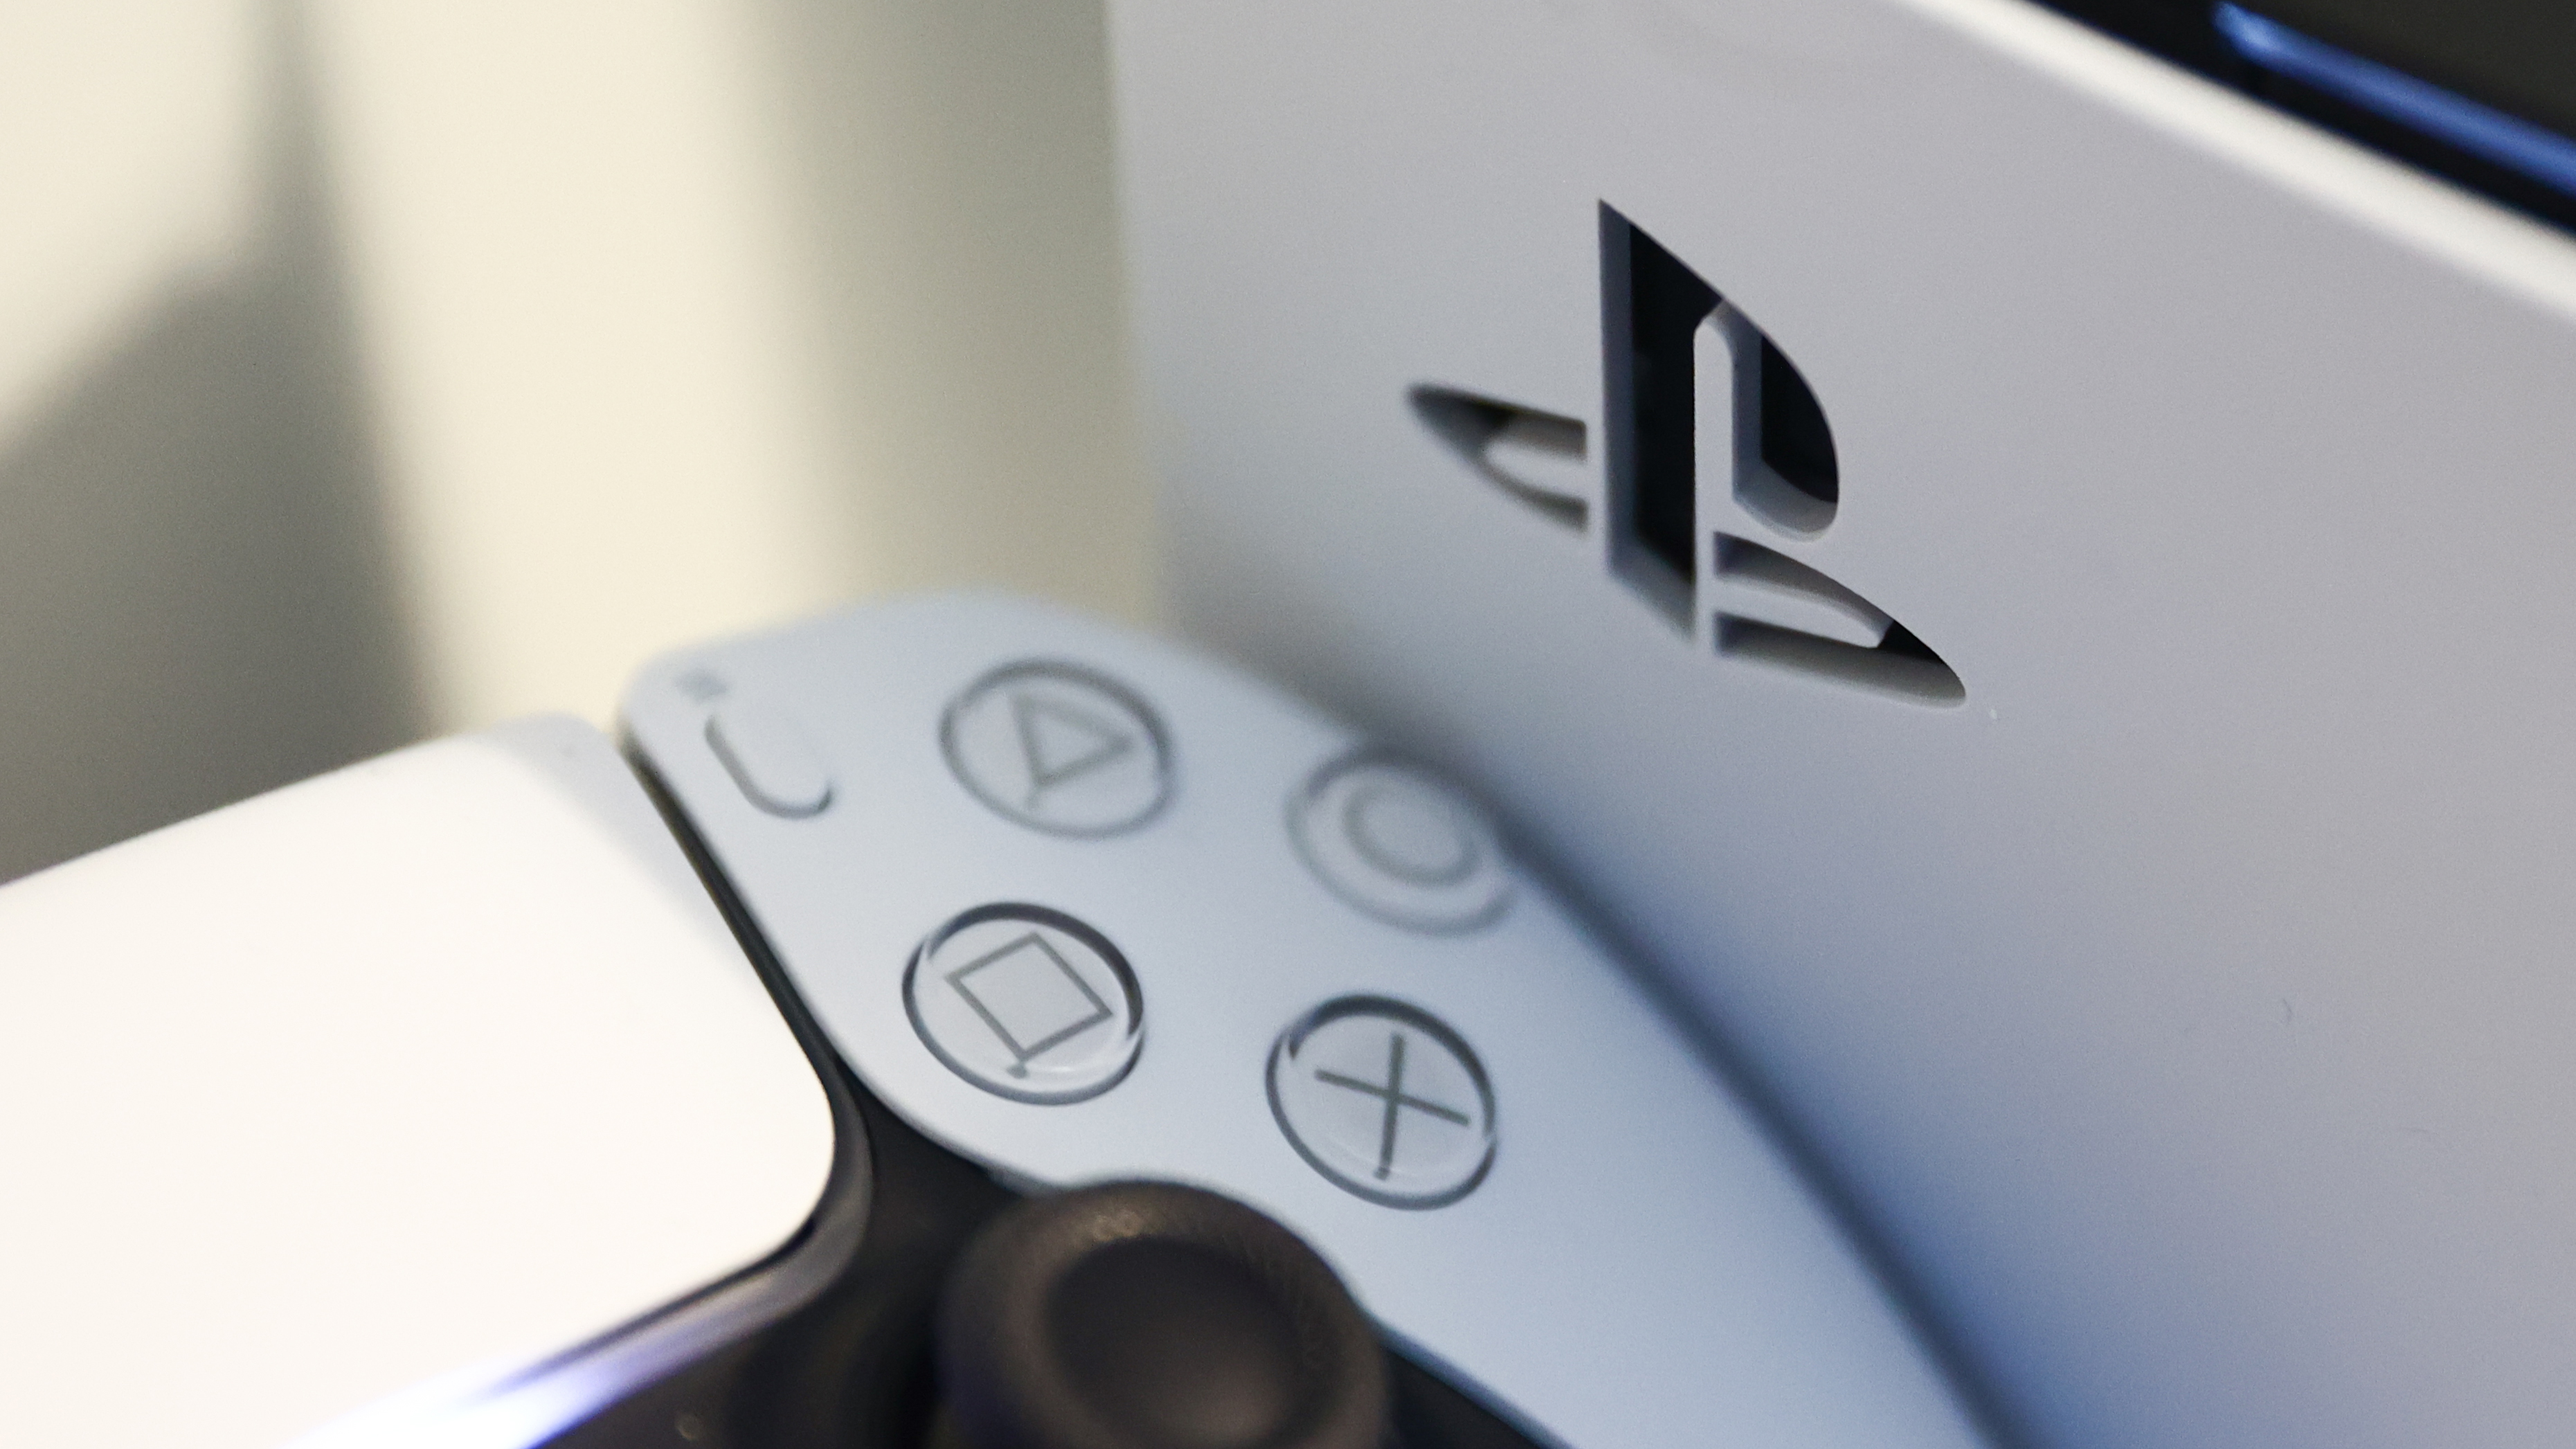 These 5 Sony PS5 Slim features would tempt me to buy…